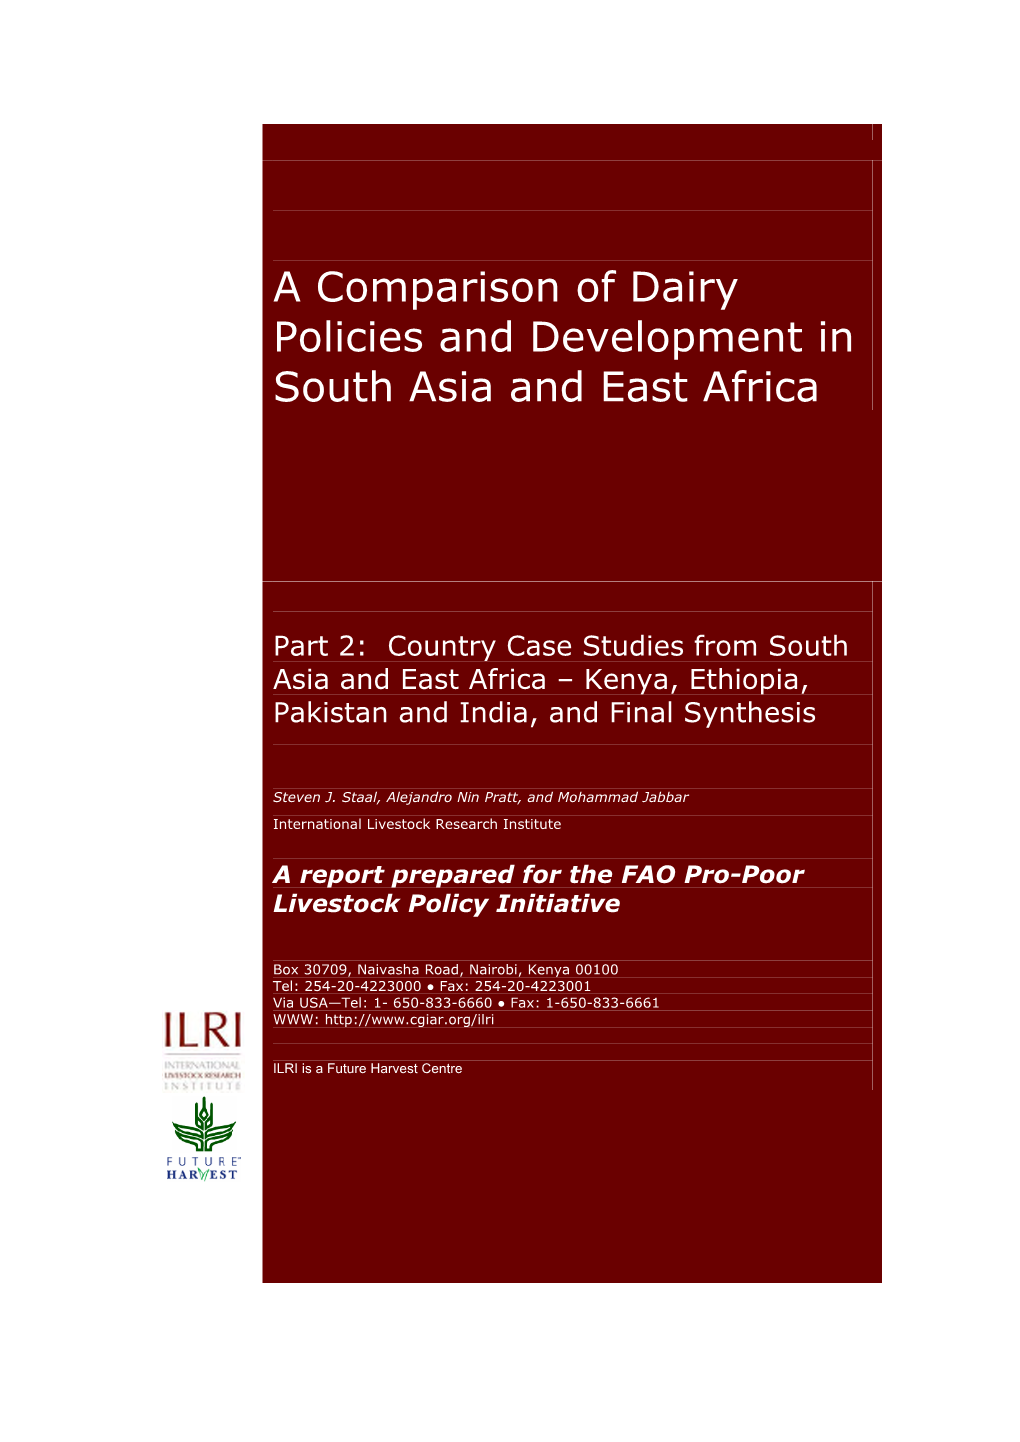 A Comparison of Dairy Policies and Development in South Asia and East Africa